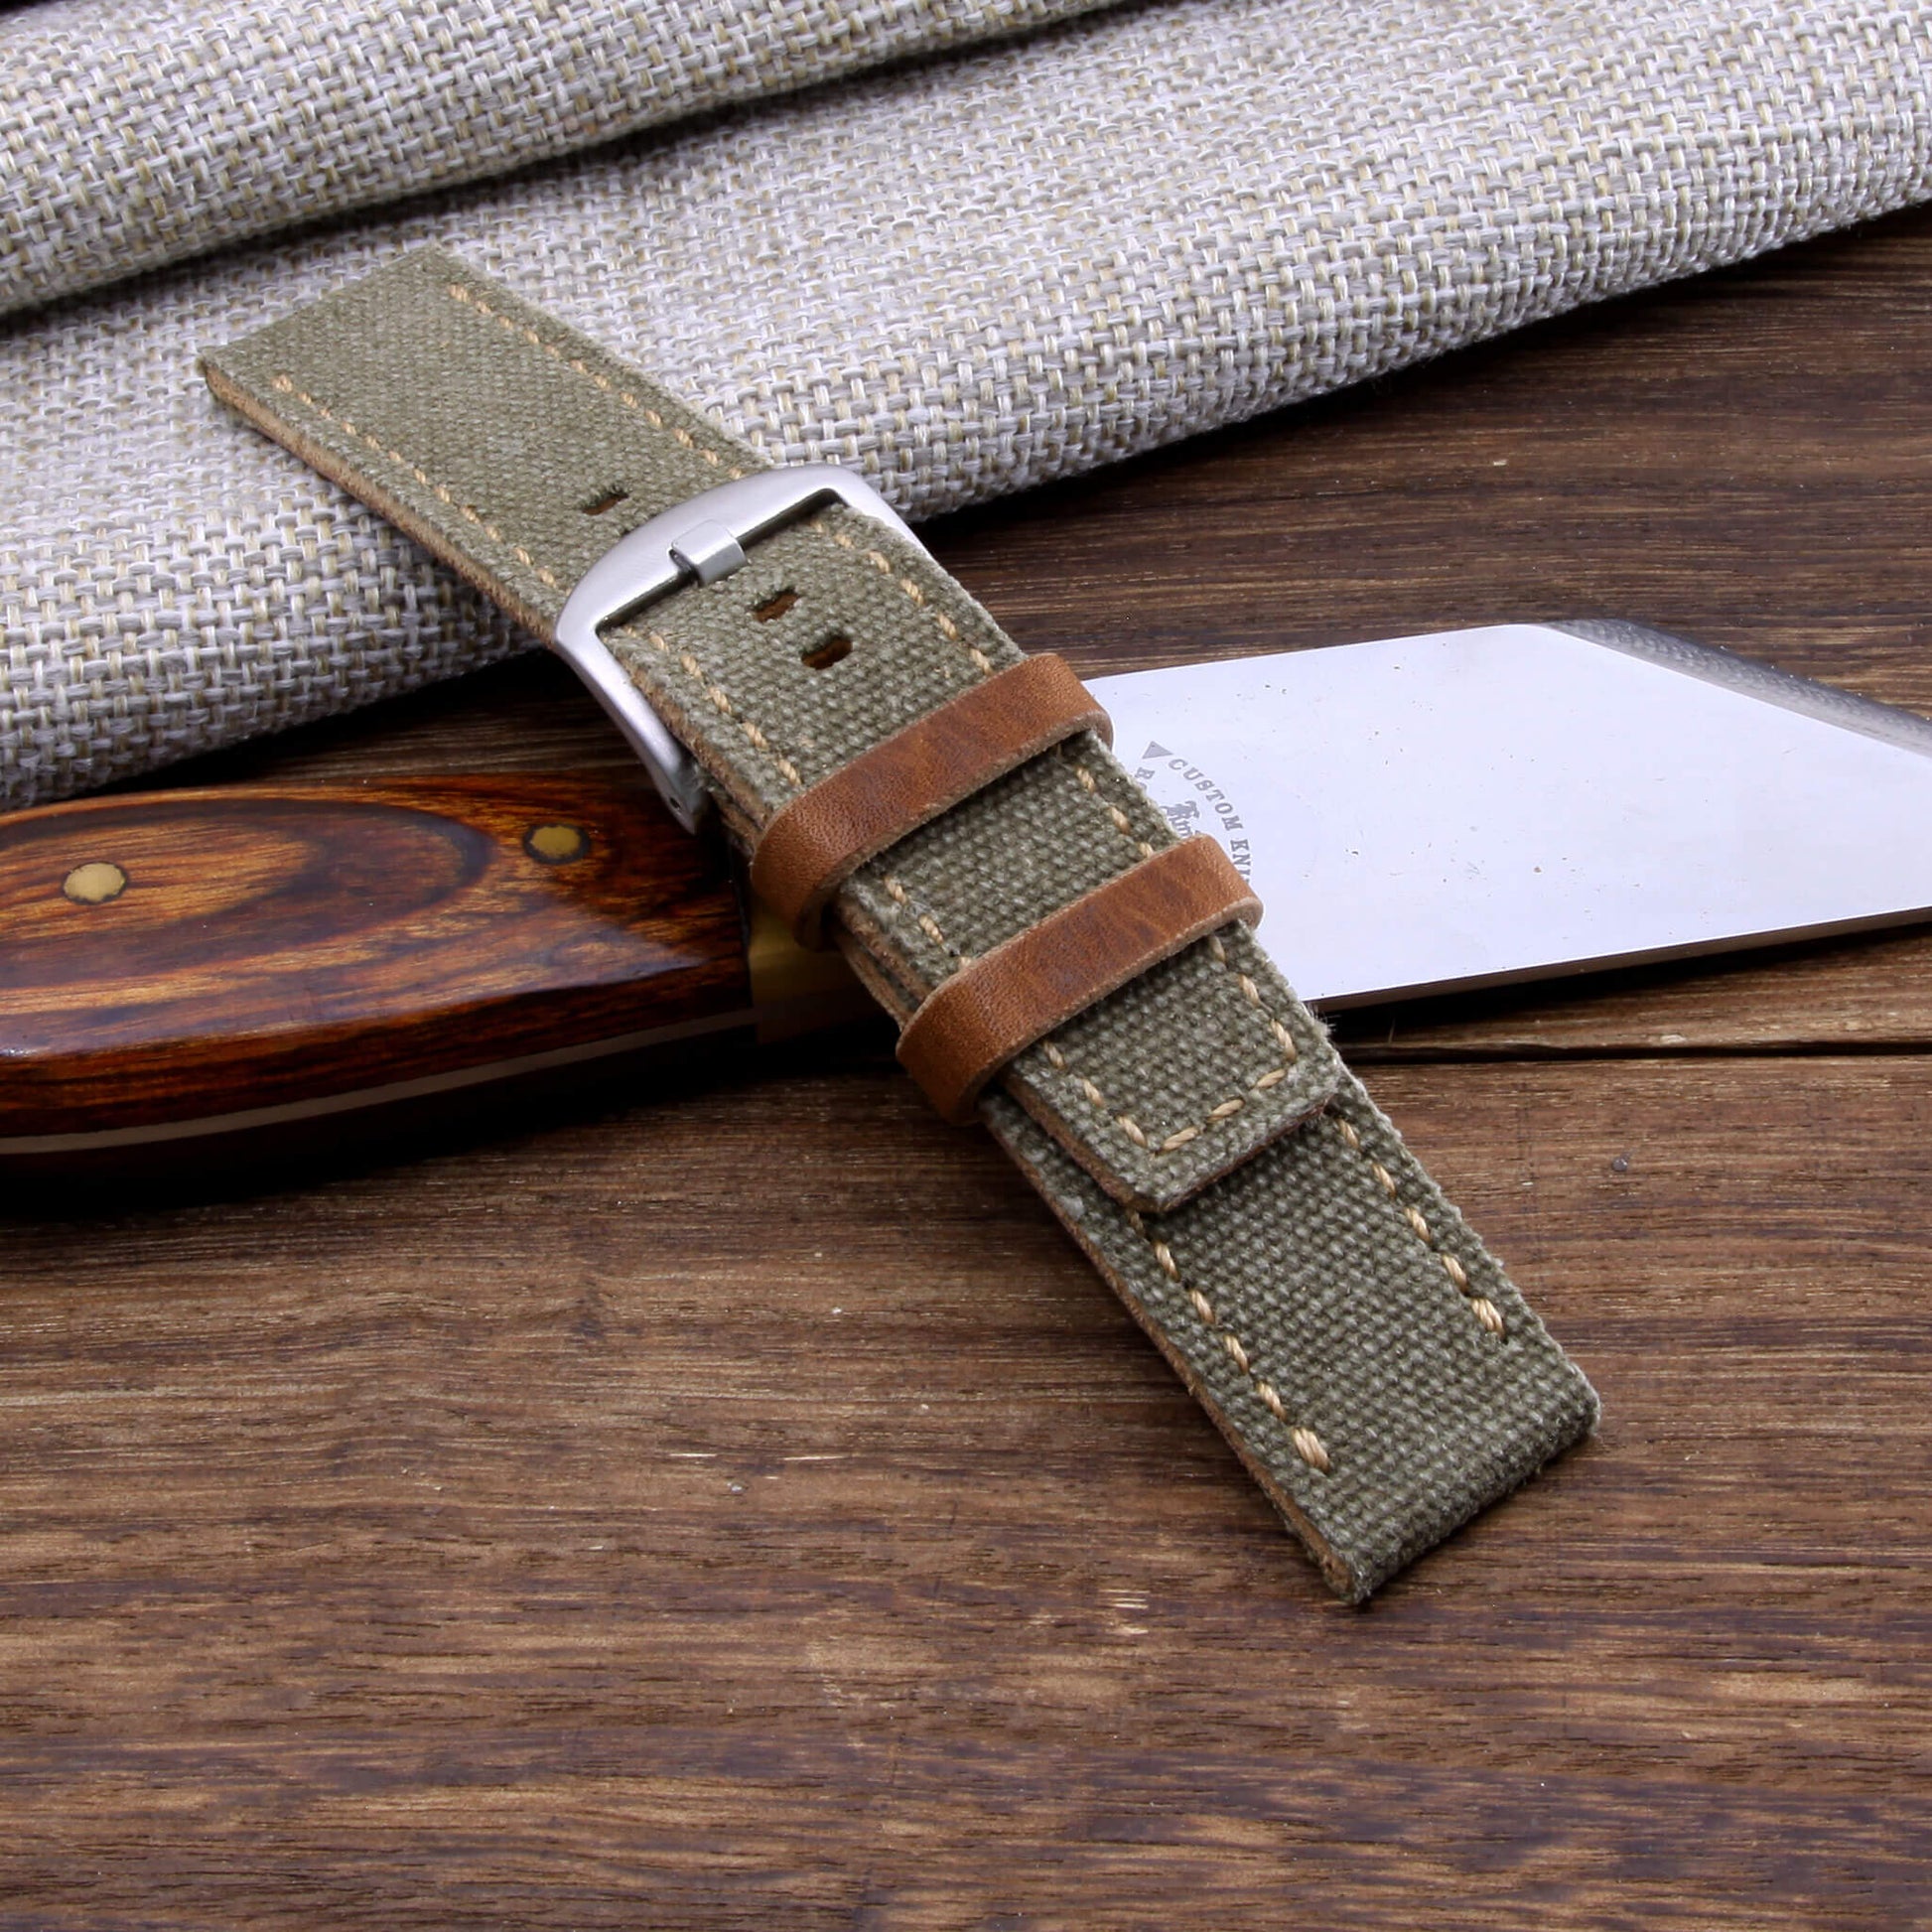 4th View of 2-Piece Full Stitch Leather Watch Strap, made with Military Green Canvas and Italian veg-tanned leather lining, handcrafted by Cozy Handmade